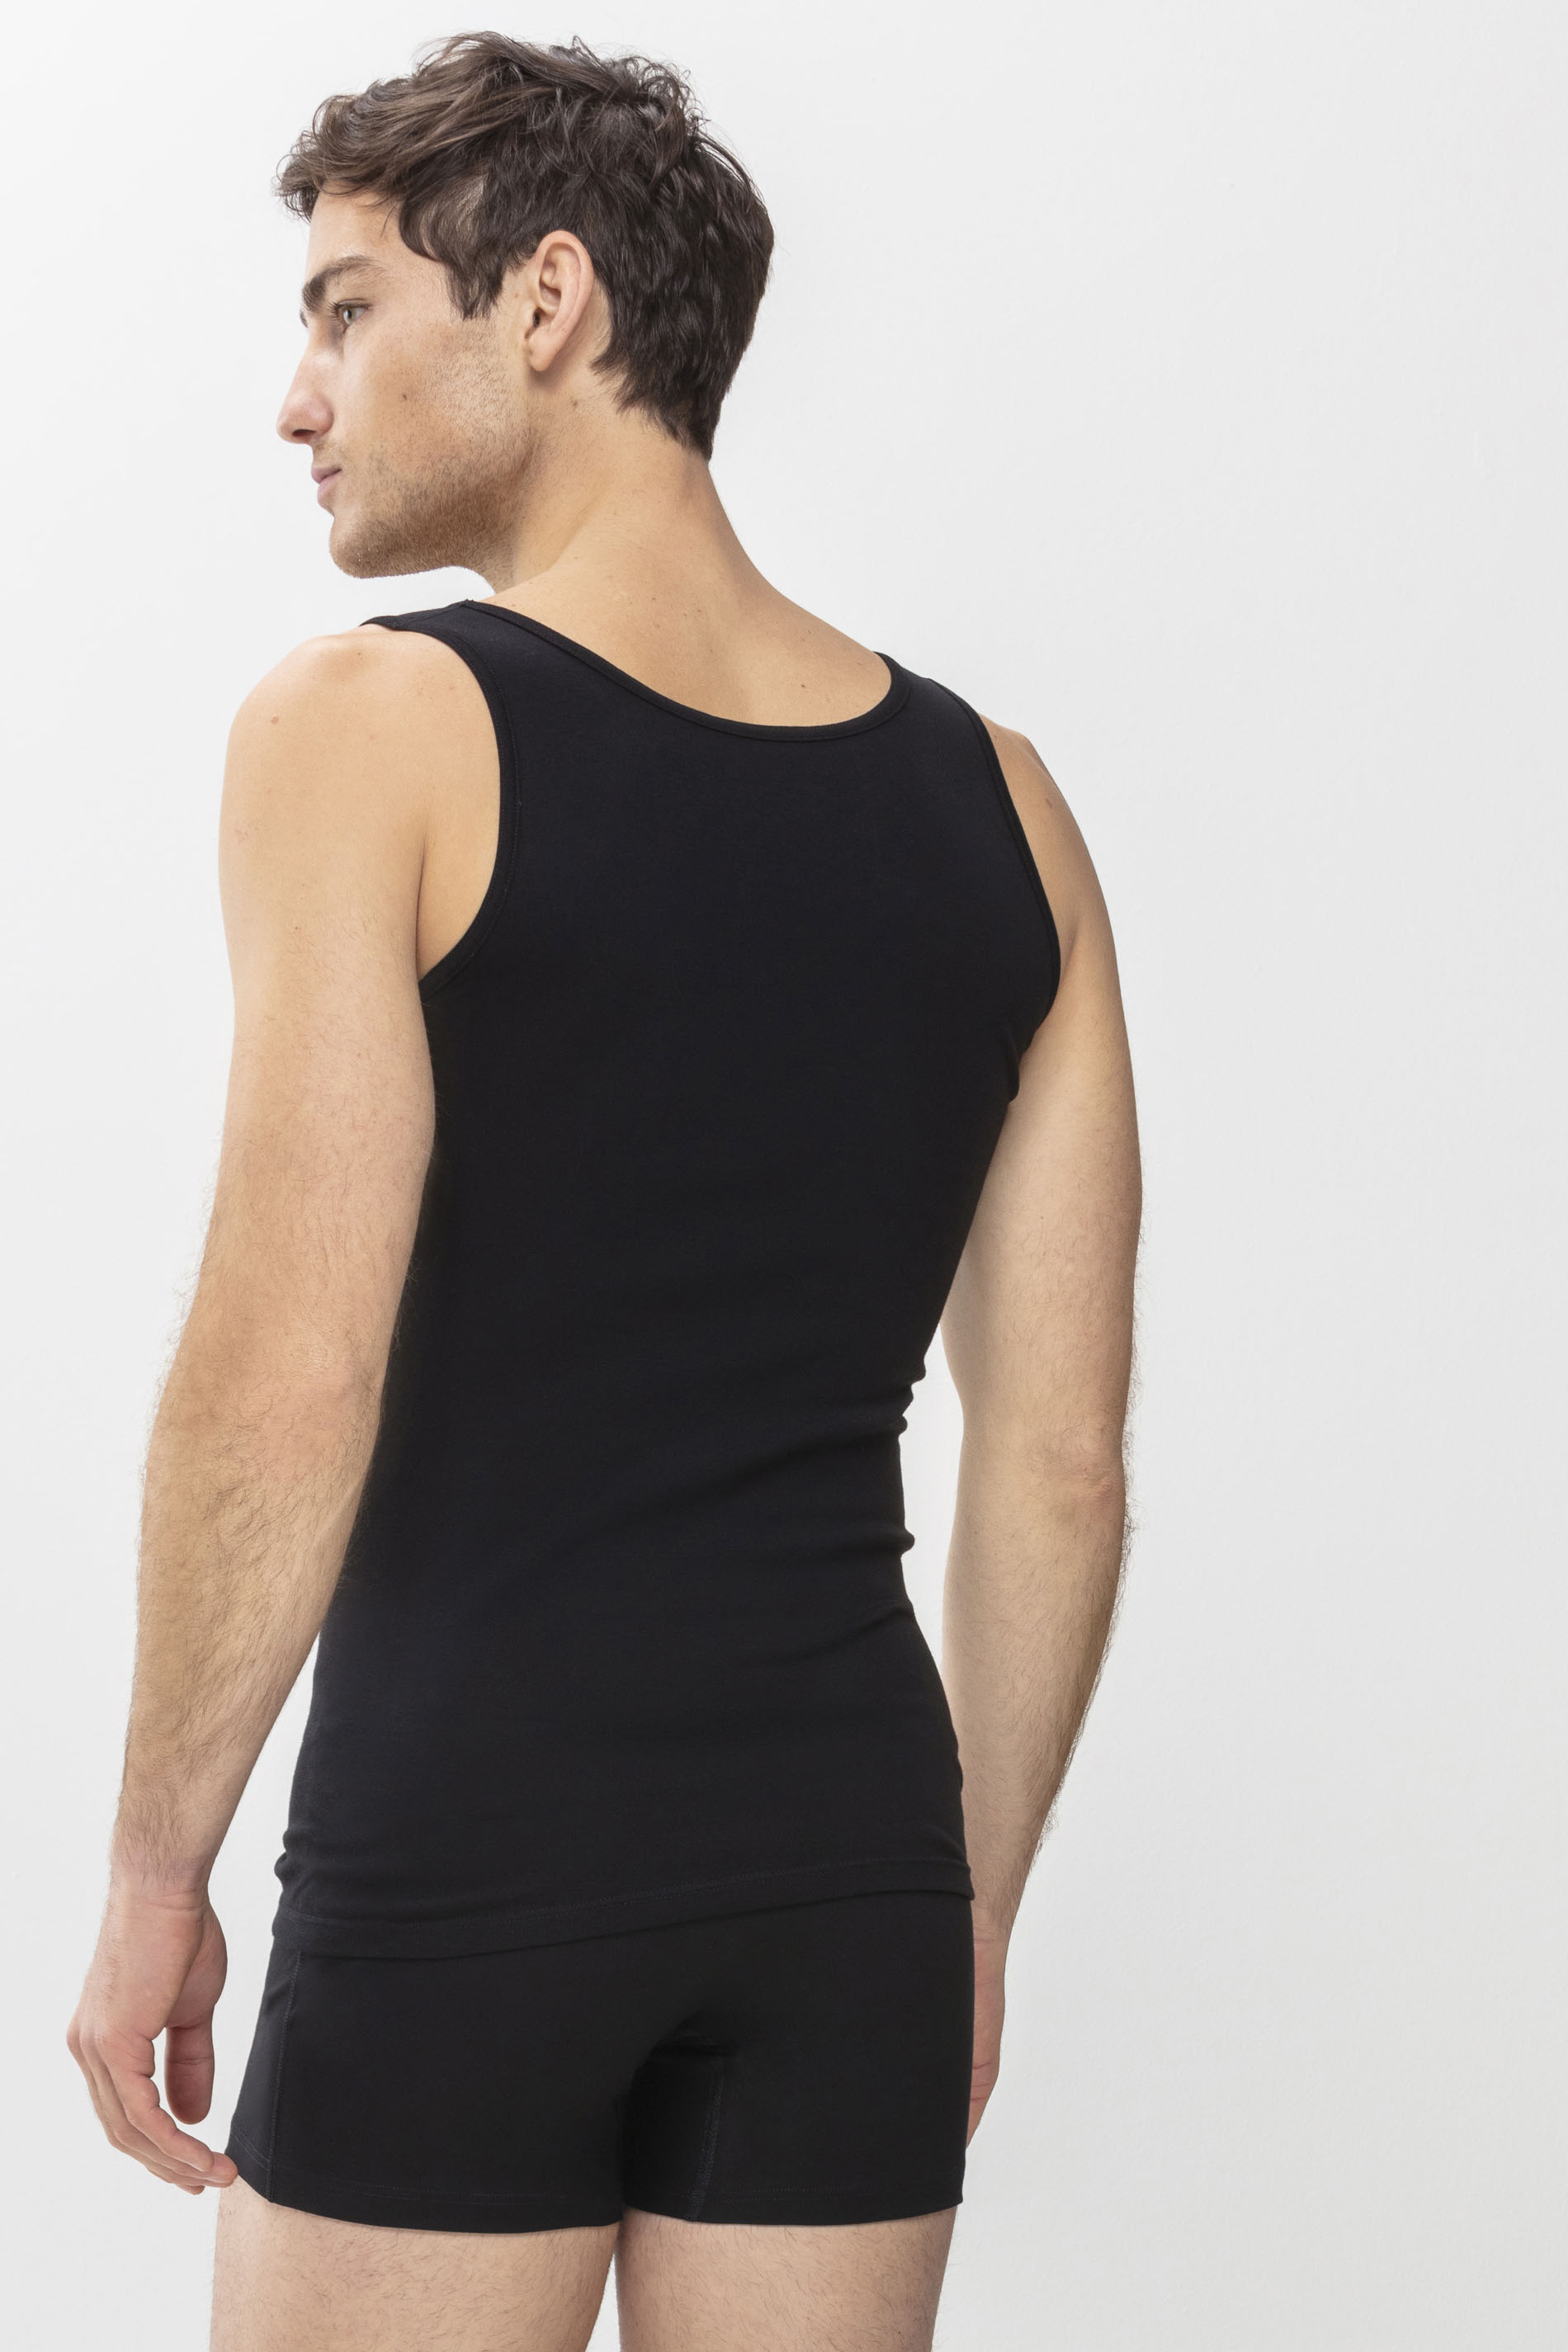 Athletic-Shirt Black Serie Casual Cotton Rear View | mey®